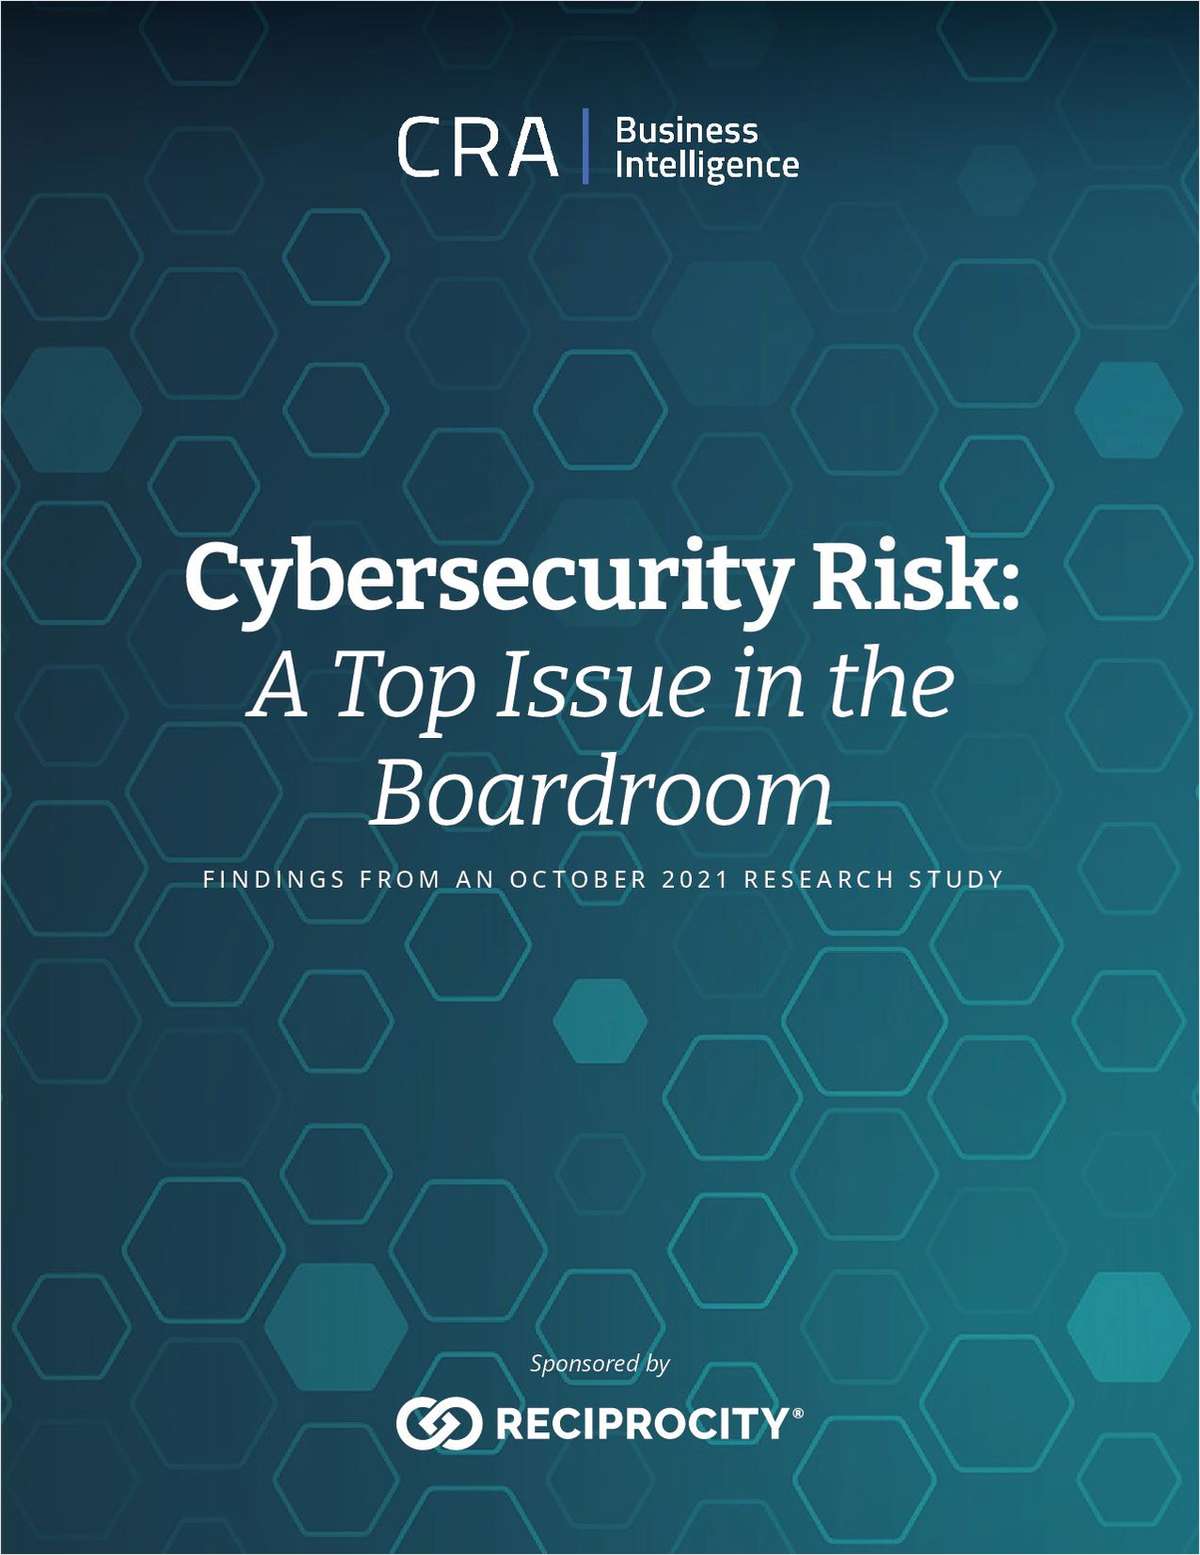 Cybersecurity Risk: A Top Issue in the Boardroom